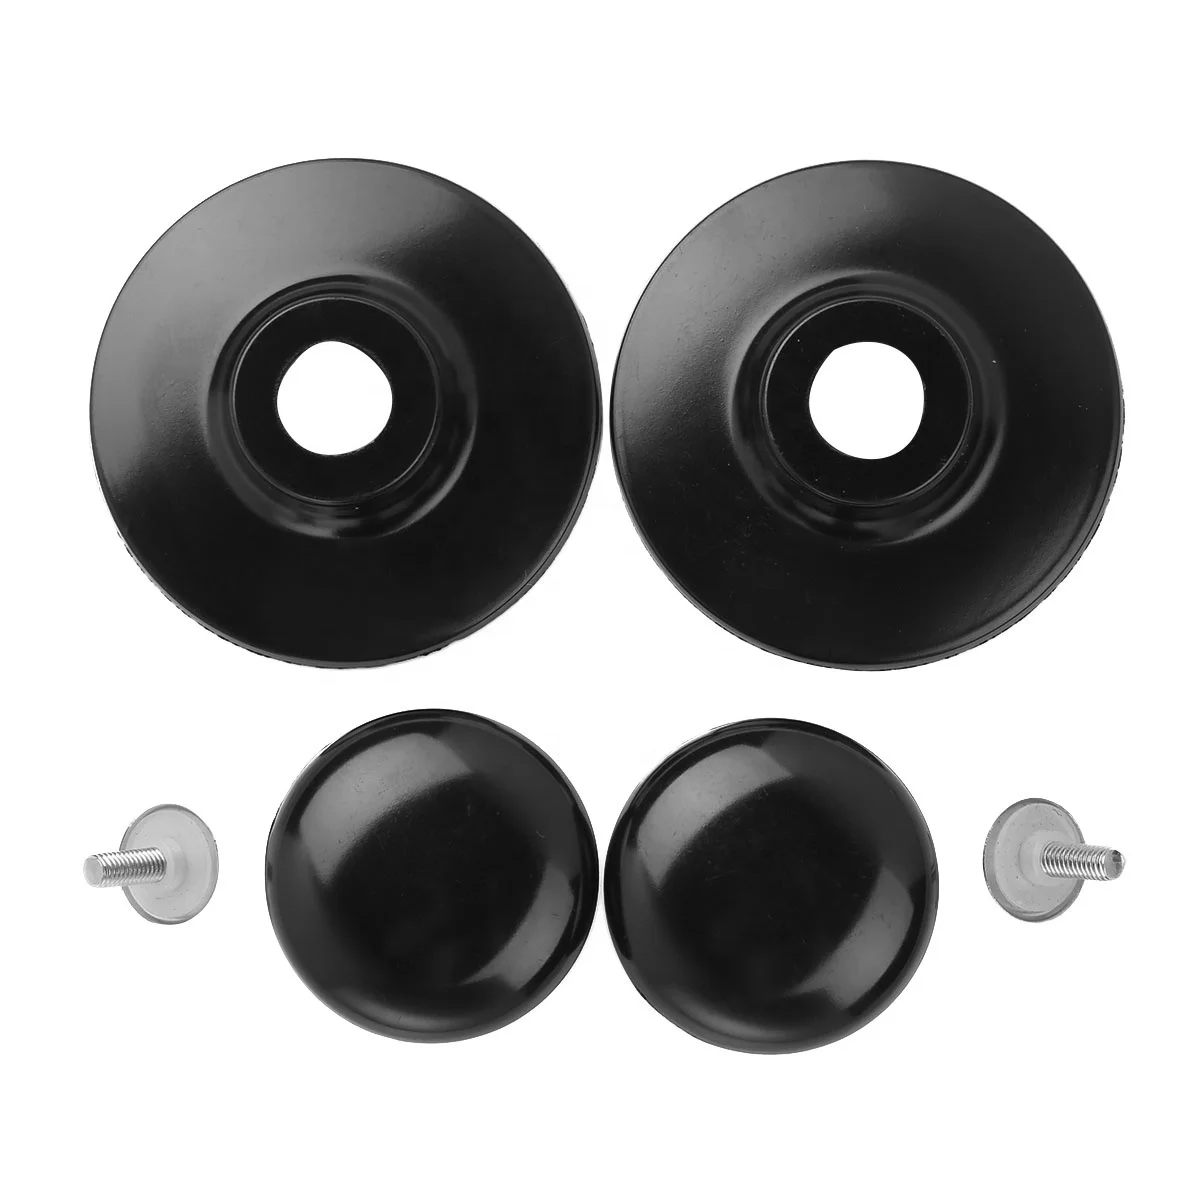 Pot Lid Knobs Handles Replacement Pan Lid Handle Crock Universal Easy to Install 